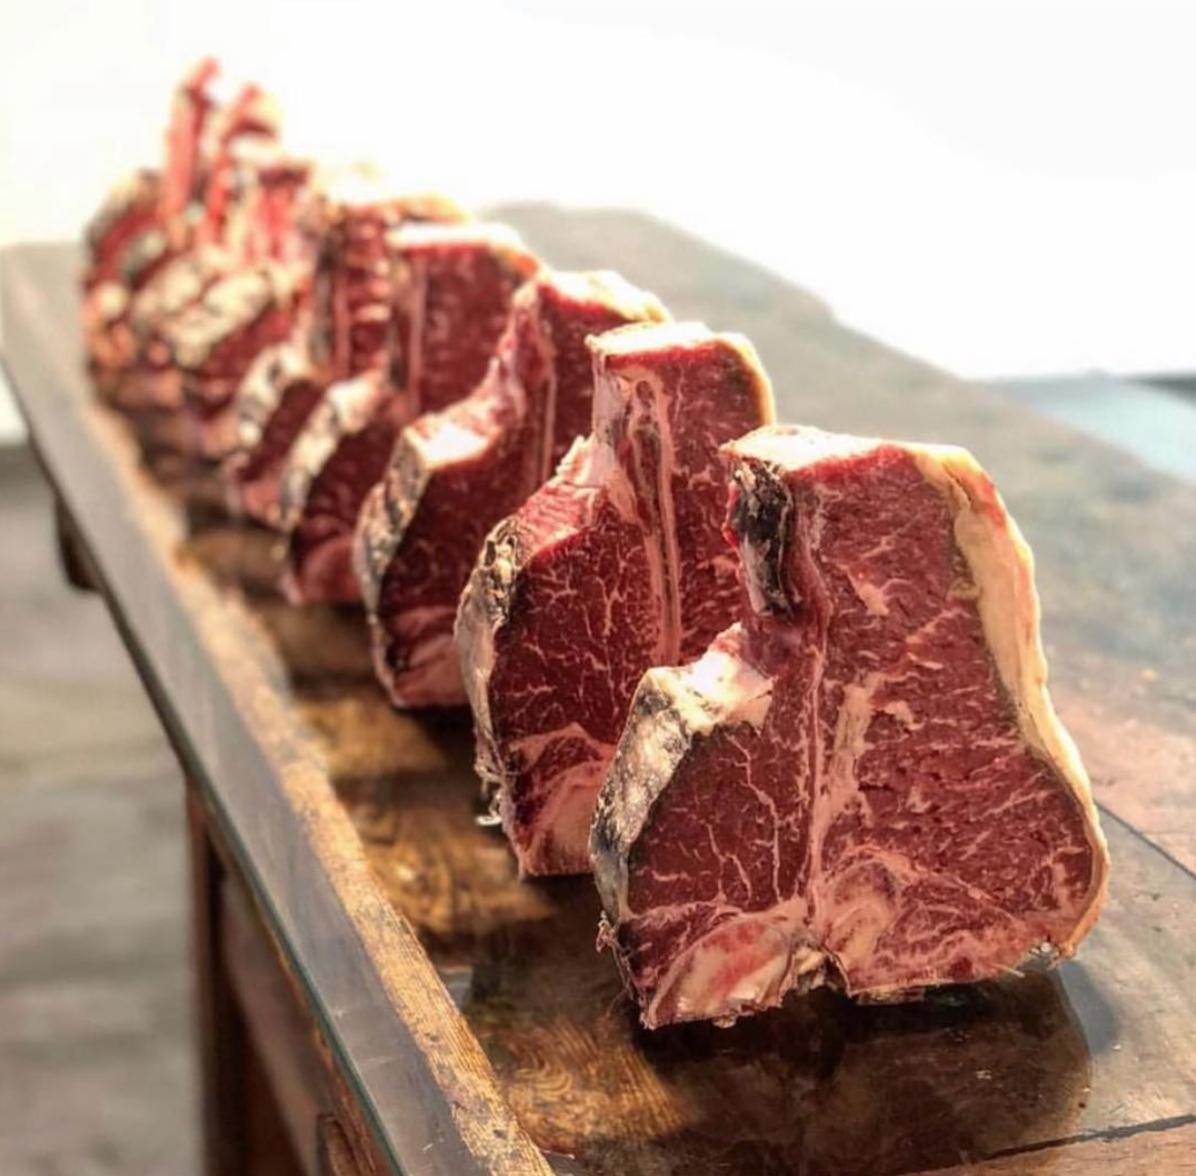 Seeing as it's Great British Beef Week #GBBW we couldn't help but share this awesome line up of tasty t-bones with you! 📷 for.the.meat.lovers